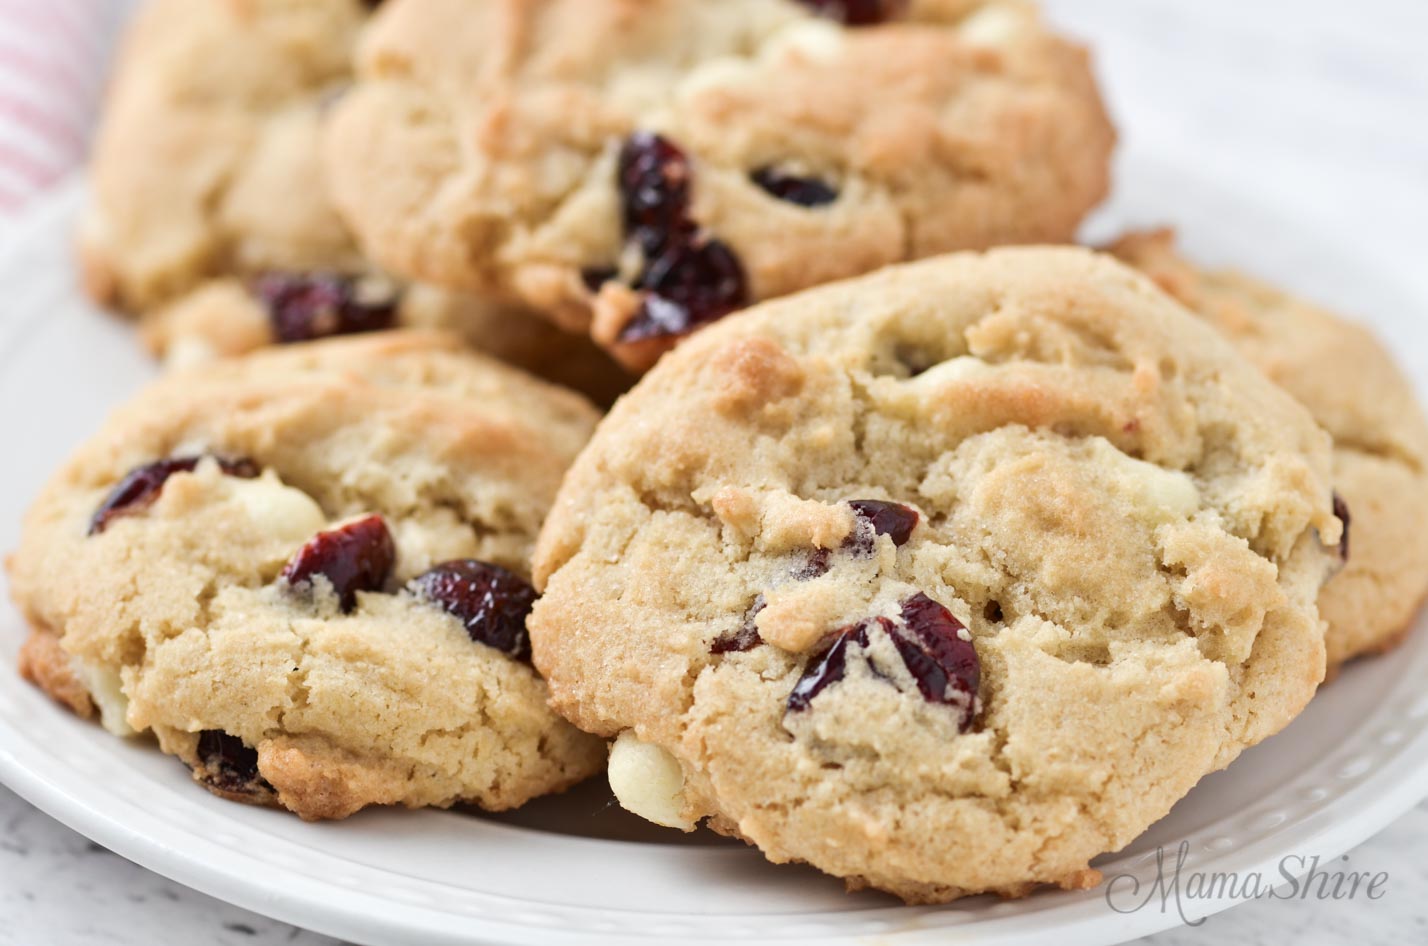 Cookies filled with white chocolate chips and cranberries.